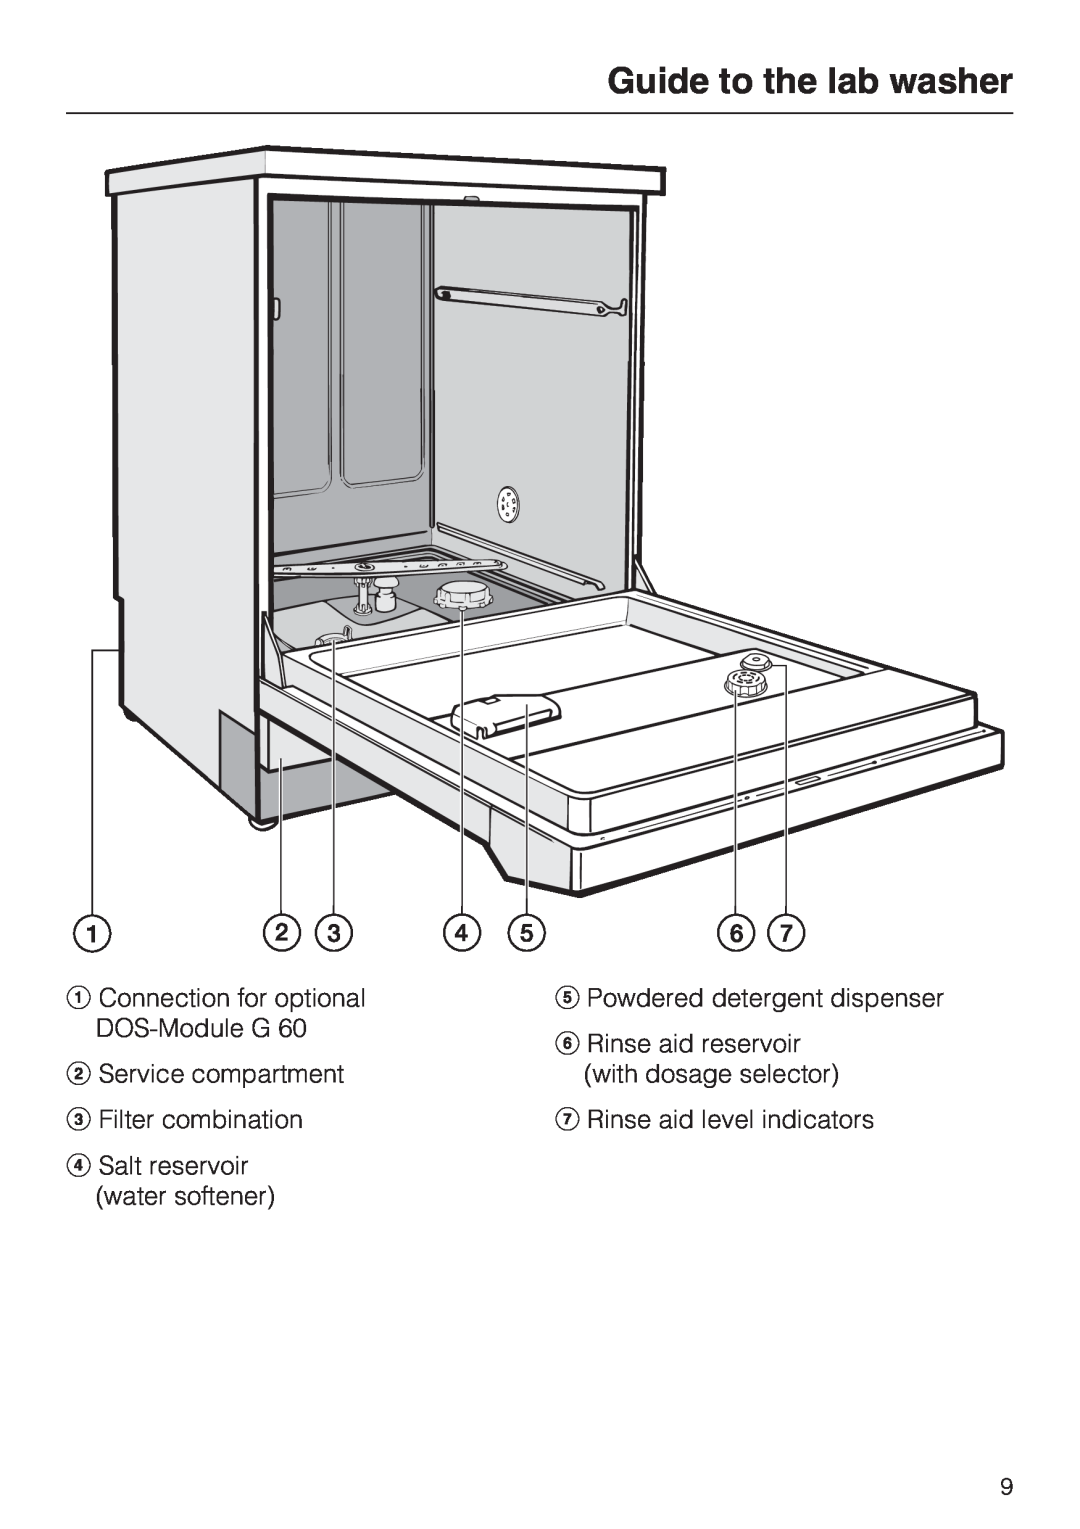 Miele G 7883 installation instructions Guide to the lab washer, a Connection for optional 